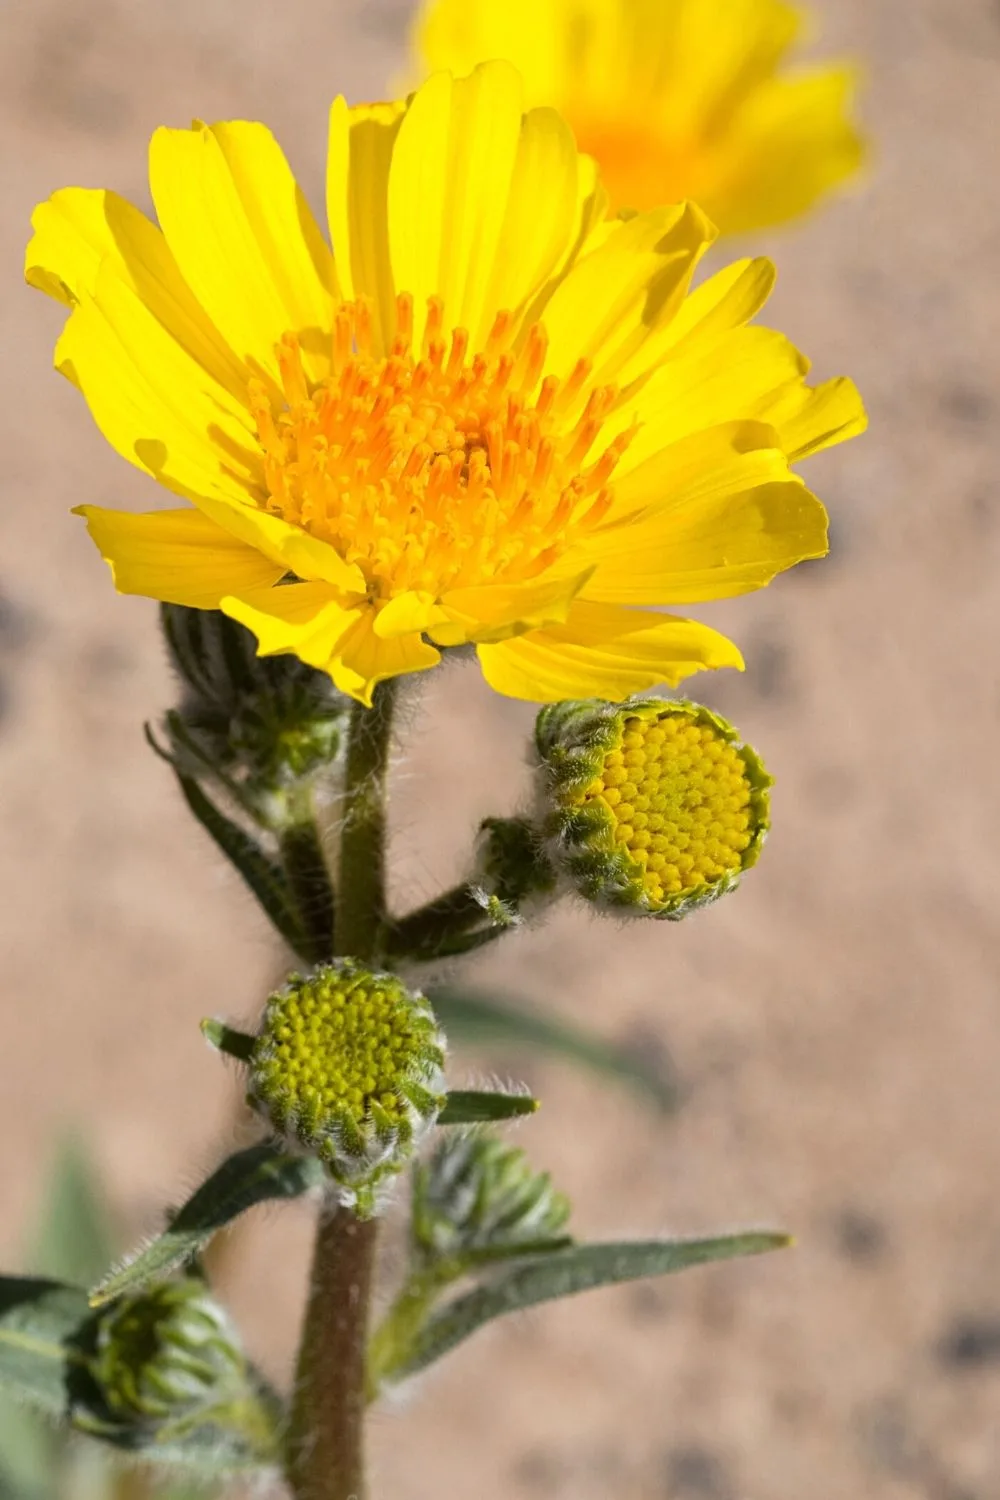 Desert Sunflower, known for its yellow, daisy-like blooms, adds a pop of color to your southwest facing garden